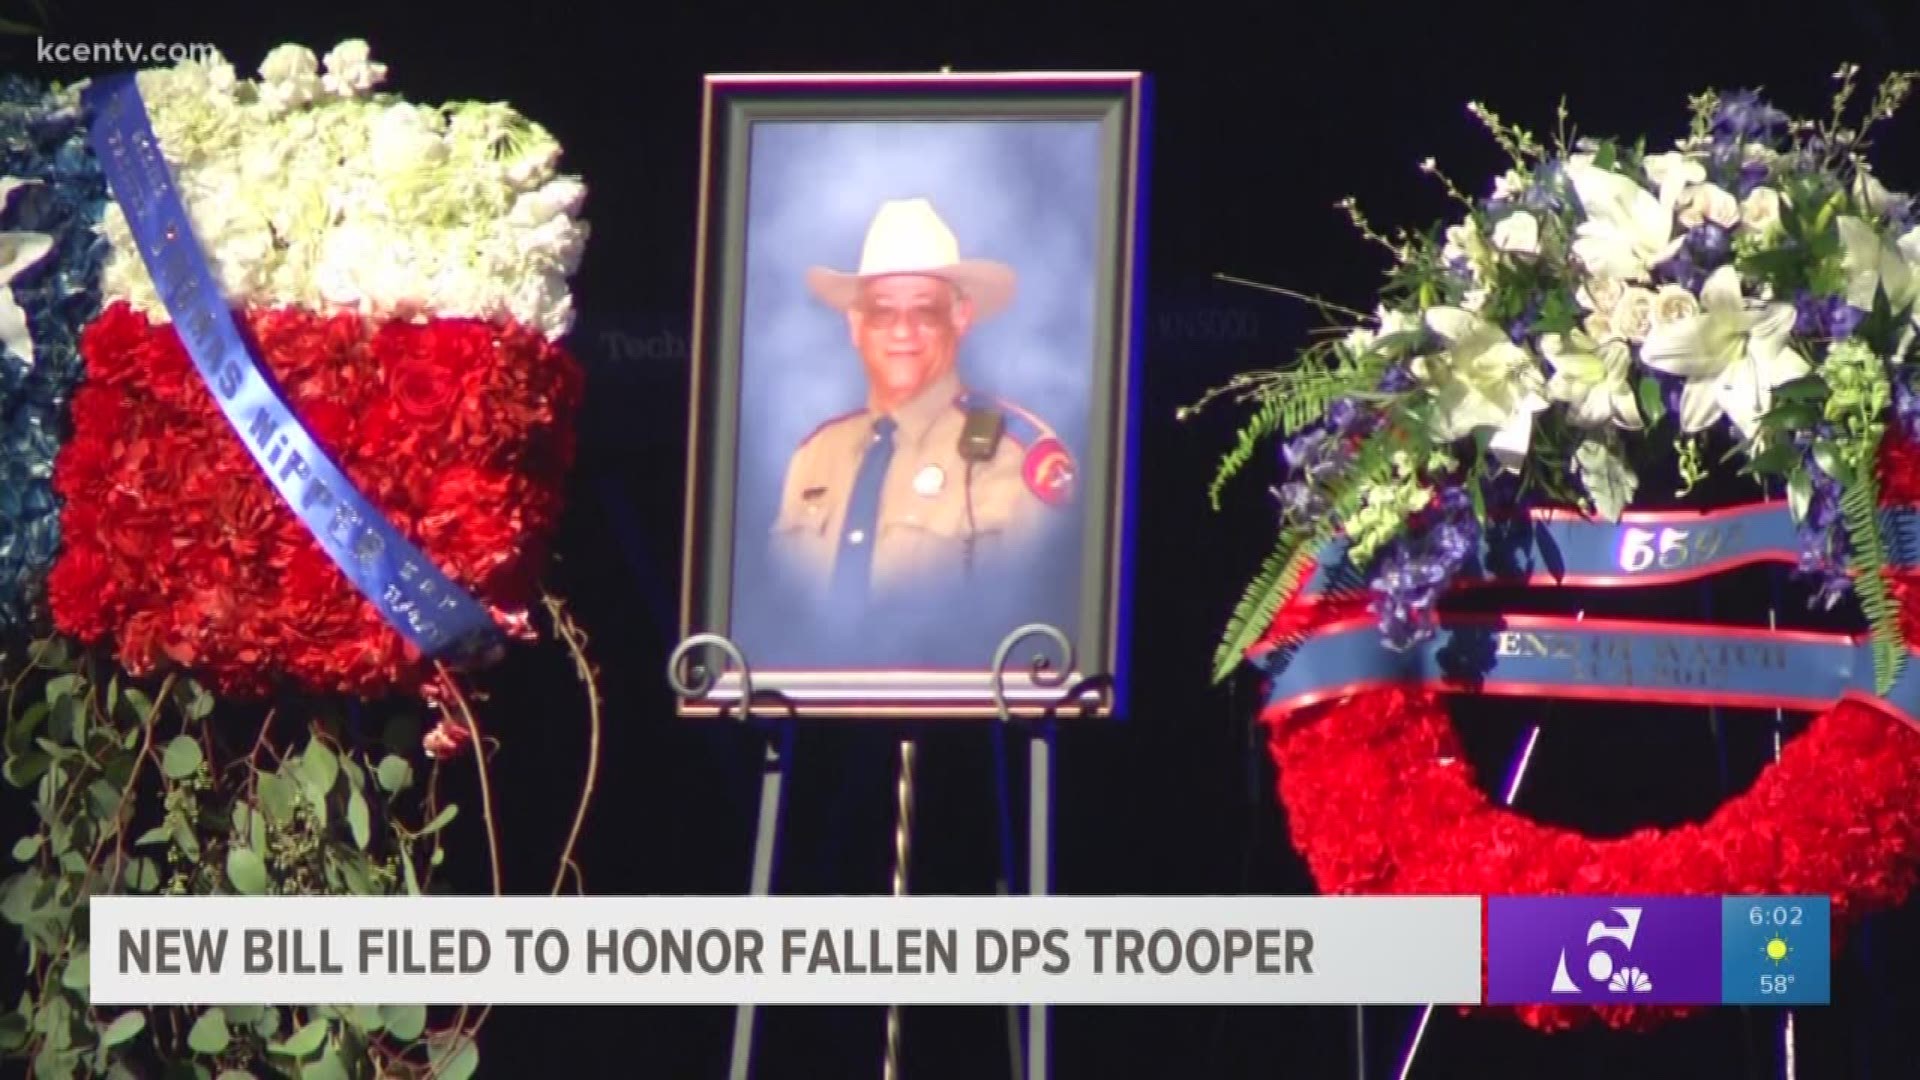 A stretch of I-35 will honor Trooper Tom Nipper, who was killed after being struck by a vehicle during a traffic stop last year.